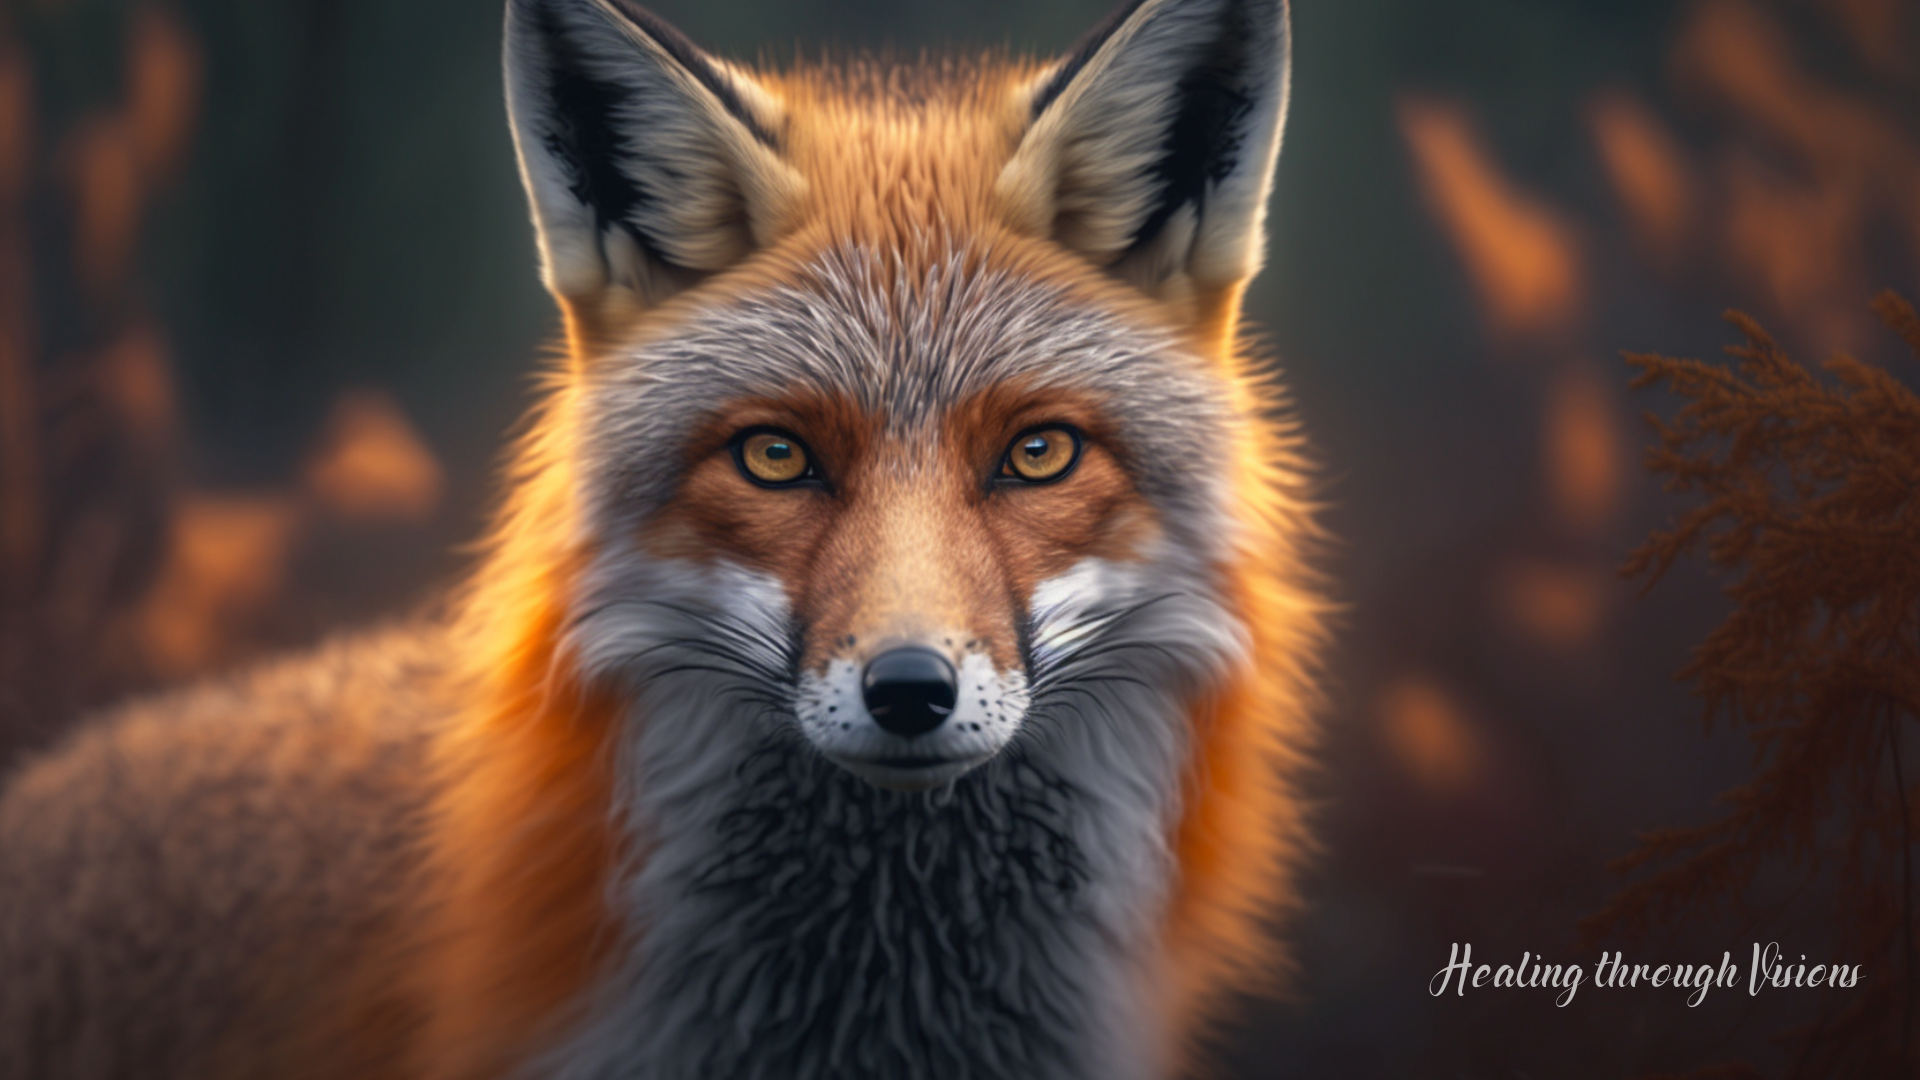 A stunning portrait of a red fox, captured in the middle of a forest clearing. Its fur is a deep, vibrant shade of red, with white underbelly and black legs. Its piercing eyes are a fiery yellow.